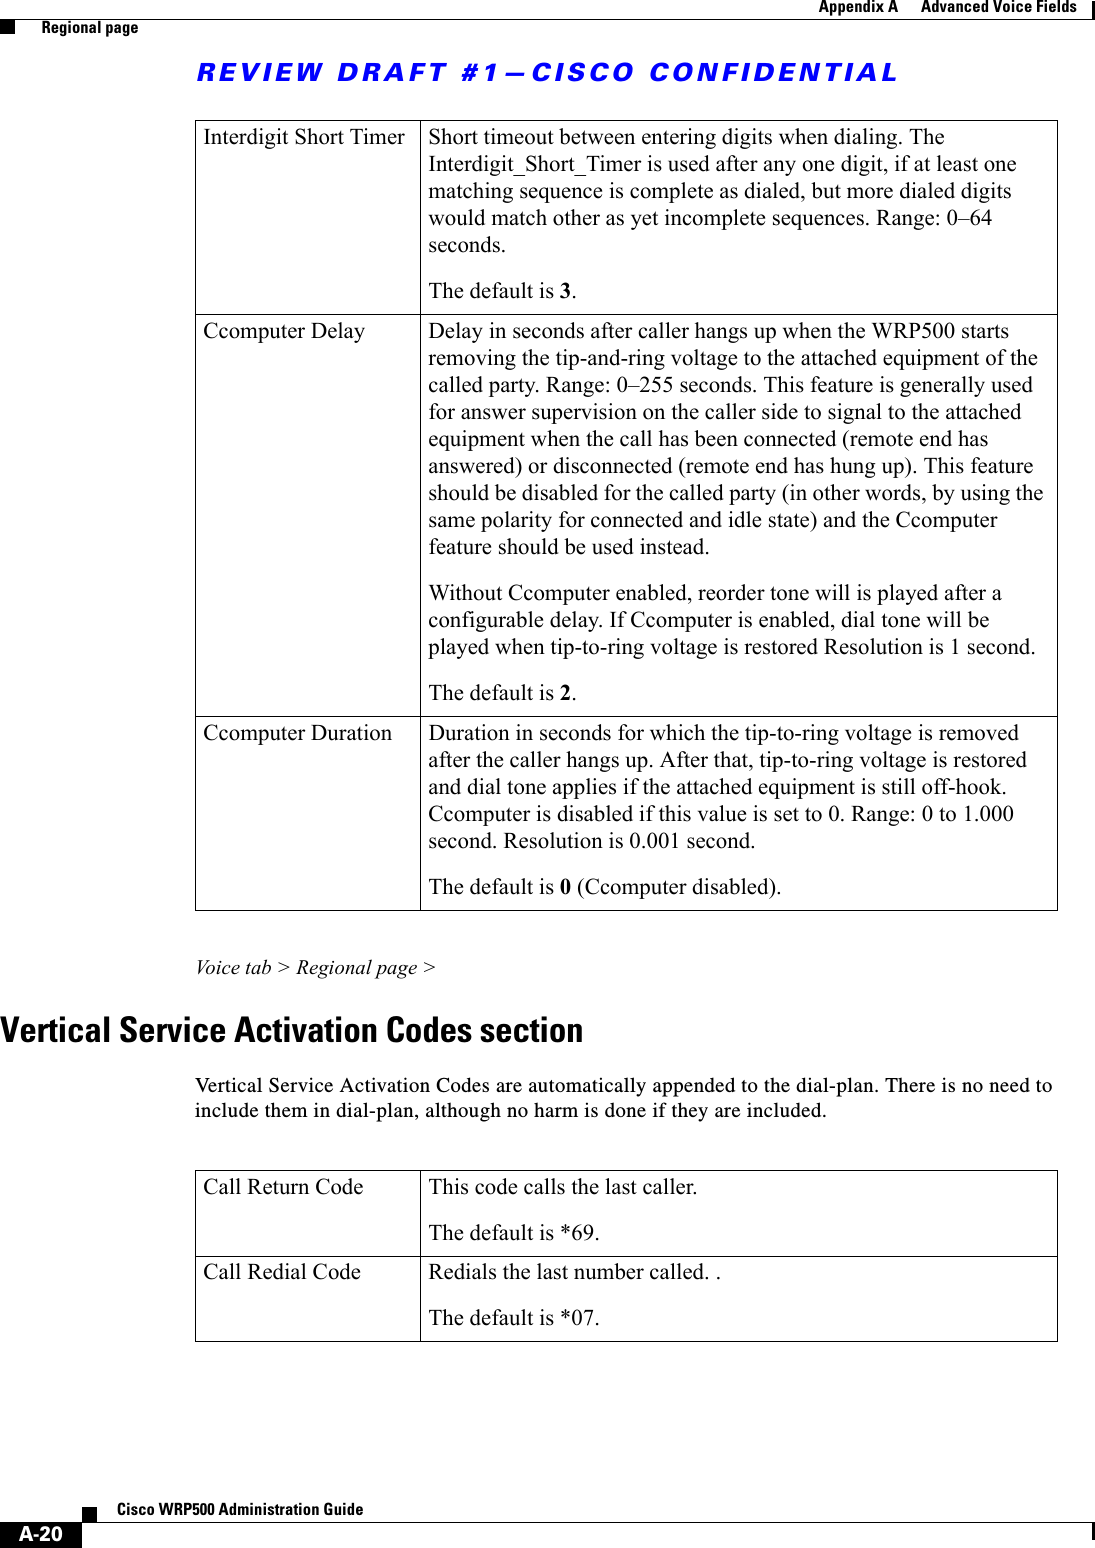 REVIEW DRAFT #1—CISCO CONFIDENTIALA-20Cisco WRP500 Administration Guide Appendix A      Advanced Voice Fields  Regional pageVoice tab &gt; Regional page &gt;Vertical Service Activation Codes sectionVertical Service Activation Codes are automatically appended to the dial-plan. There is no need to include them in dial-plan, although no harm is done if they are included. Interdigit Short Timer  Short timeout between entering digits when dialing. The Interdigit_Short_Timer is used after any one digit, if at least one matching sequence is complete as dialed, but more dialed digits would match other as yet incomplete sequences. Range: 0–64 seconds.The default is 3.Ccomputer Delay  Delay in seconds after caller hangs up when the WRP500 starts removing the tip-and-ring voltage to the attached equipment of the called party. Range: 0–255 seconds. This feature is generally used for answer supervision on the caller side to signal to the attached equipment when the call has been connected (remote end has answered) or disconnected (remote end has hung up). This feature should be disabled for the called party (in other words, by using the same polarity for connected and idle state) and the Ccomputer feature should be used instead.Without Ccomputer enabled, reorder tone will is played after a configurable delay. If Ccomputer is enabled, dial tone will be played when tip-to-ring voltage is restored Resolution is 1 second.The default is 2.Ccomputer Duration  Duration in seconds for which the tip-to-ring voltage is removed after the caller hangs up. After that, tip-to-ring voltage is restored and dial tone applies if the attached equipment is still off-hook. Ccomputer is disabled if this value is set to 0. Range: 0 to 1.000 second. Resolution is 0.001 second.The default is 0 (Ccomputer disabled). Call Return Code  This code calls the last caller. The default is *69.Call Redial Code  Redials the last number called. .The default is *07.